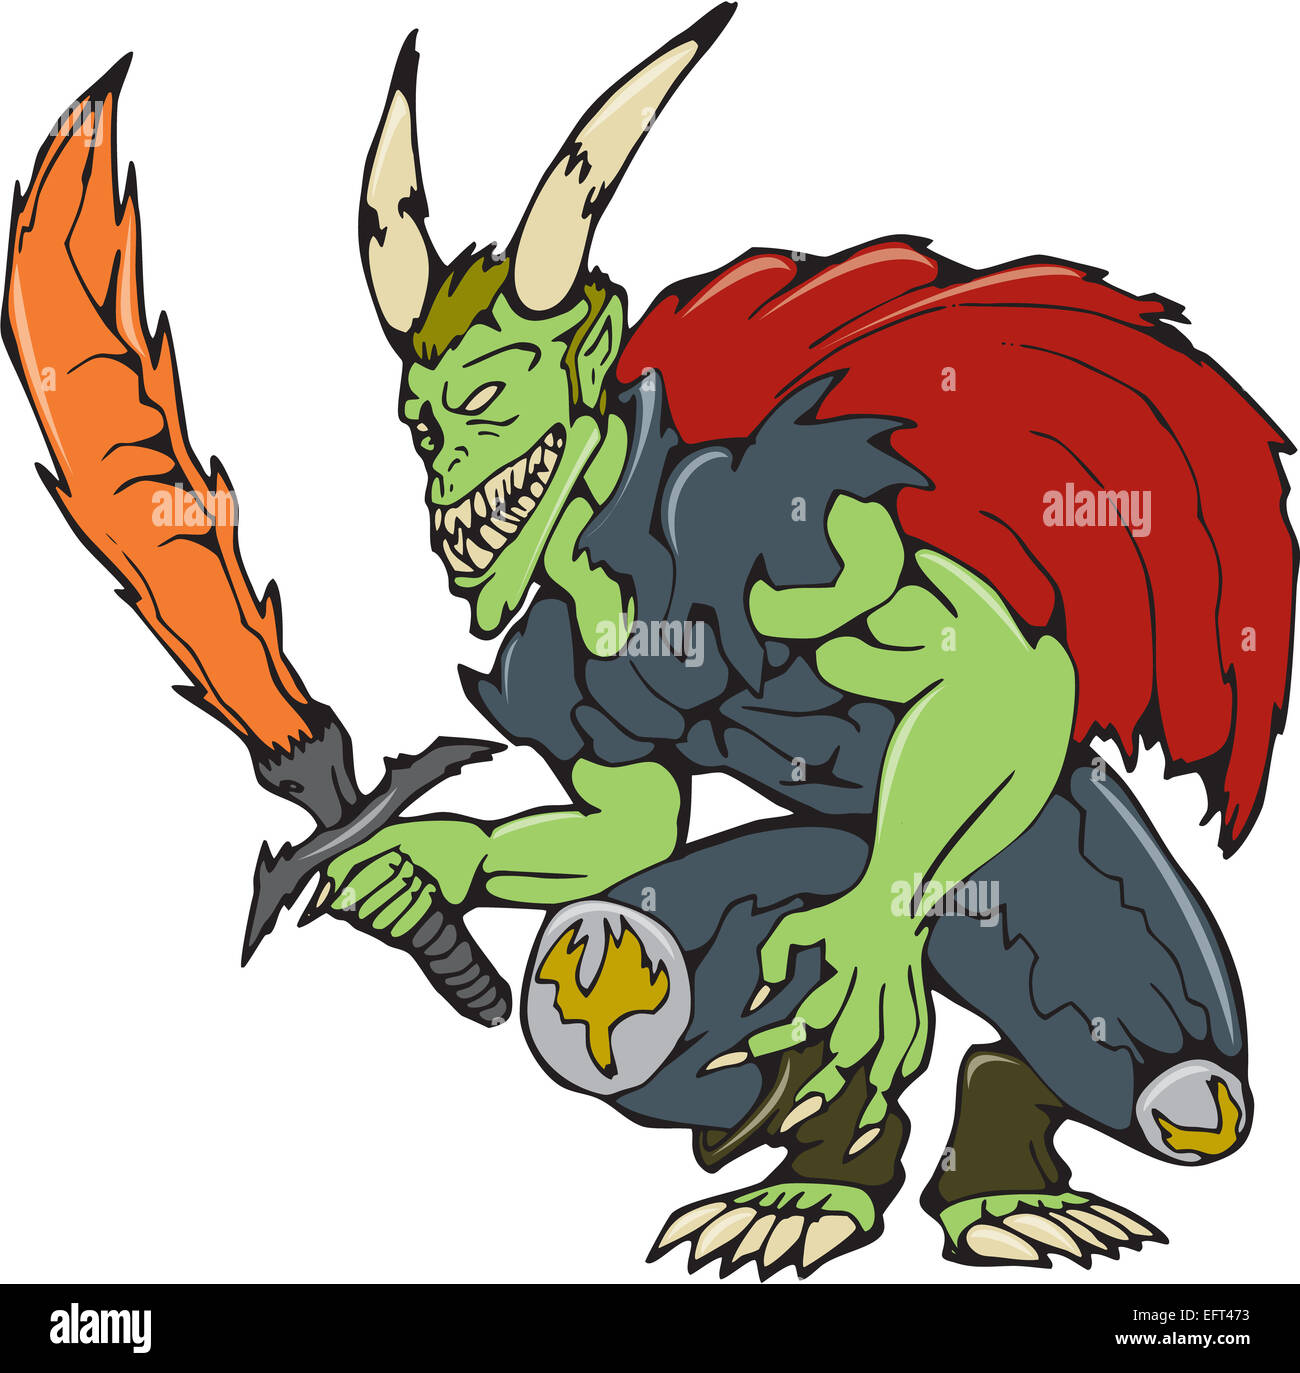 Cartoon style illustration of a demon with big horns wielding a fiery sword viewed from front on isolated background. Stock Photo